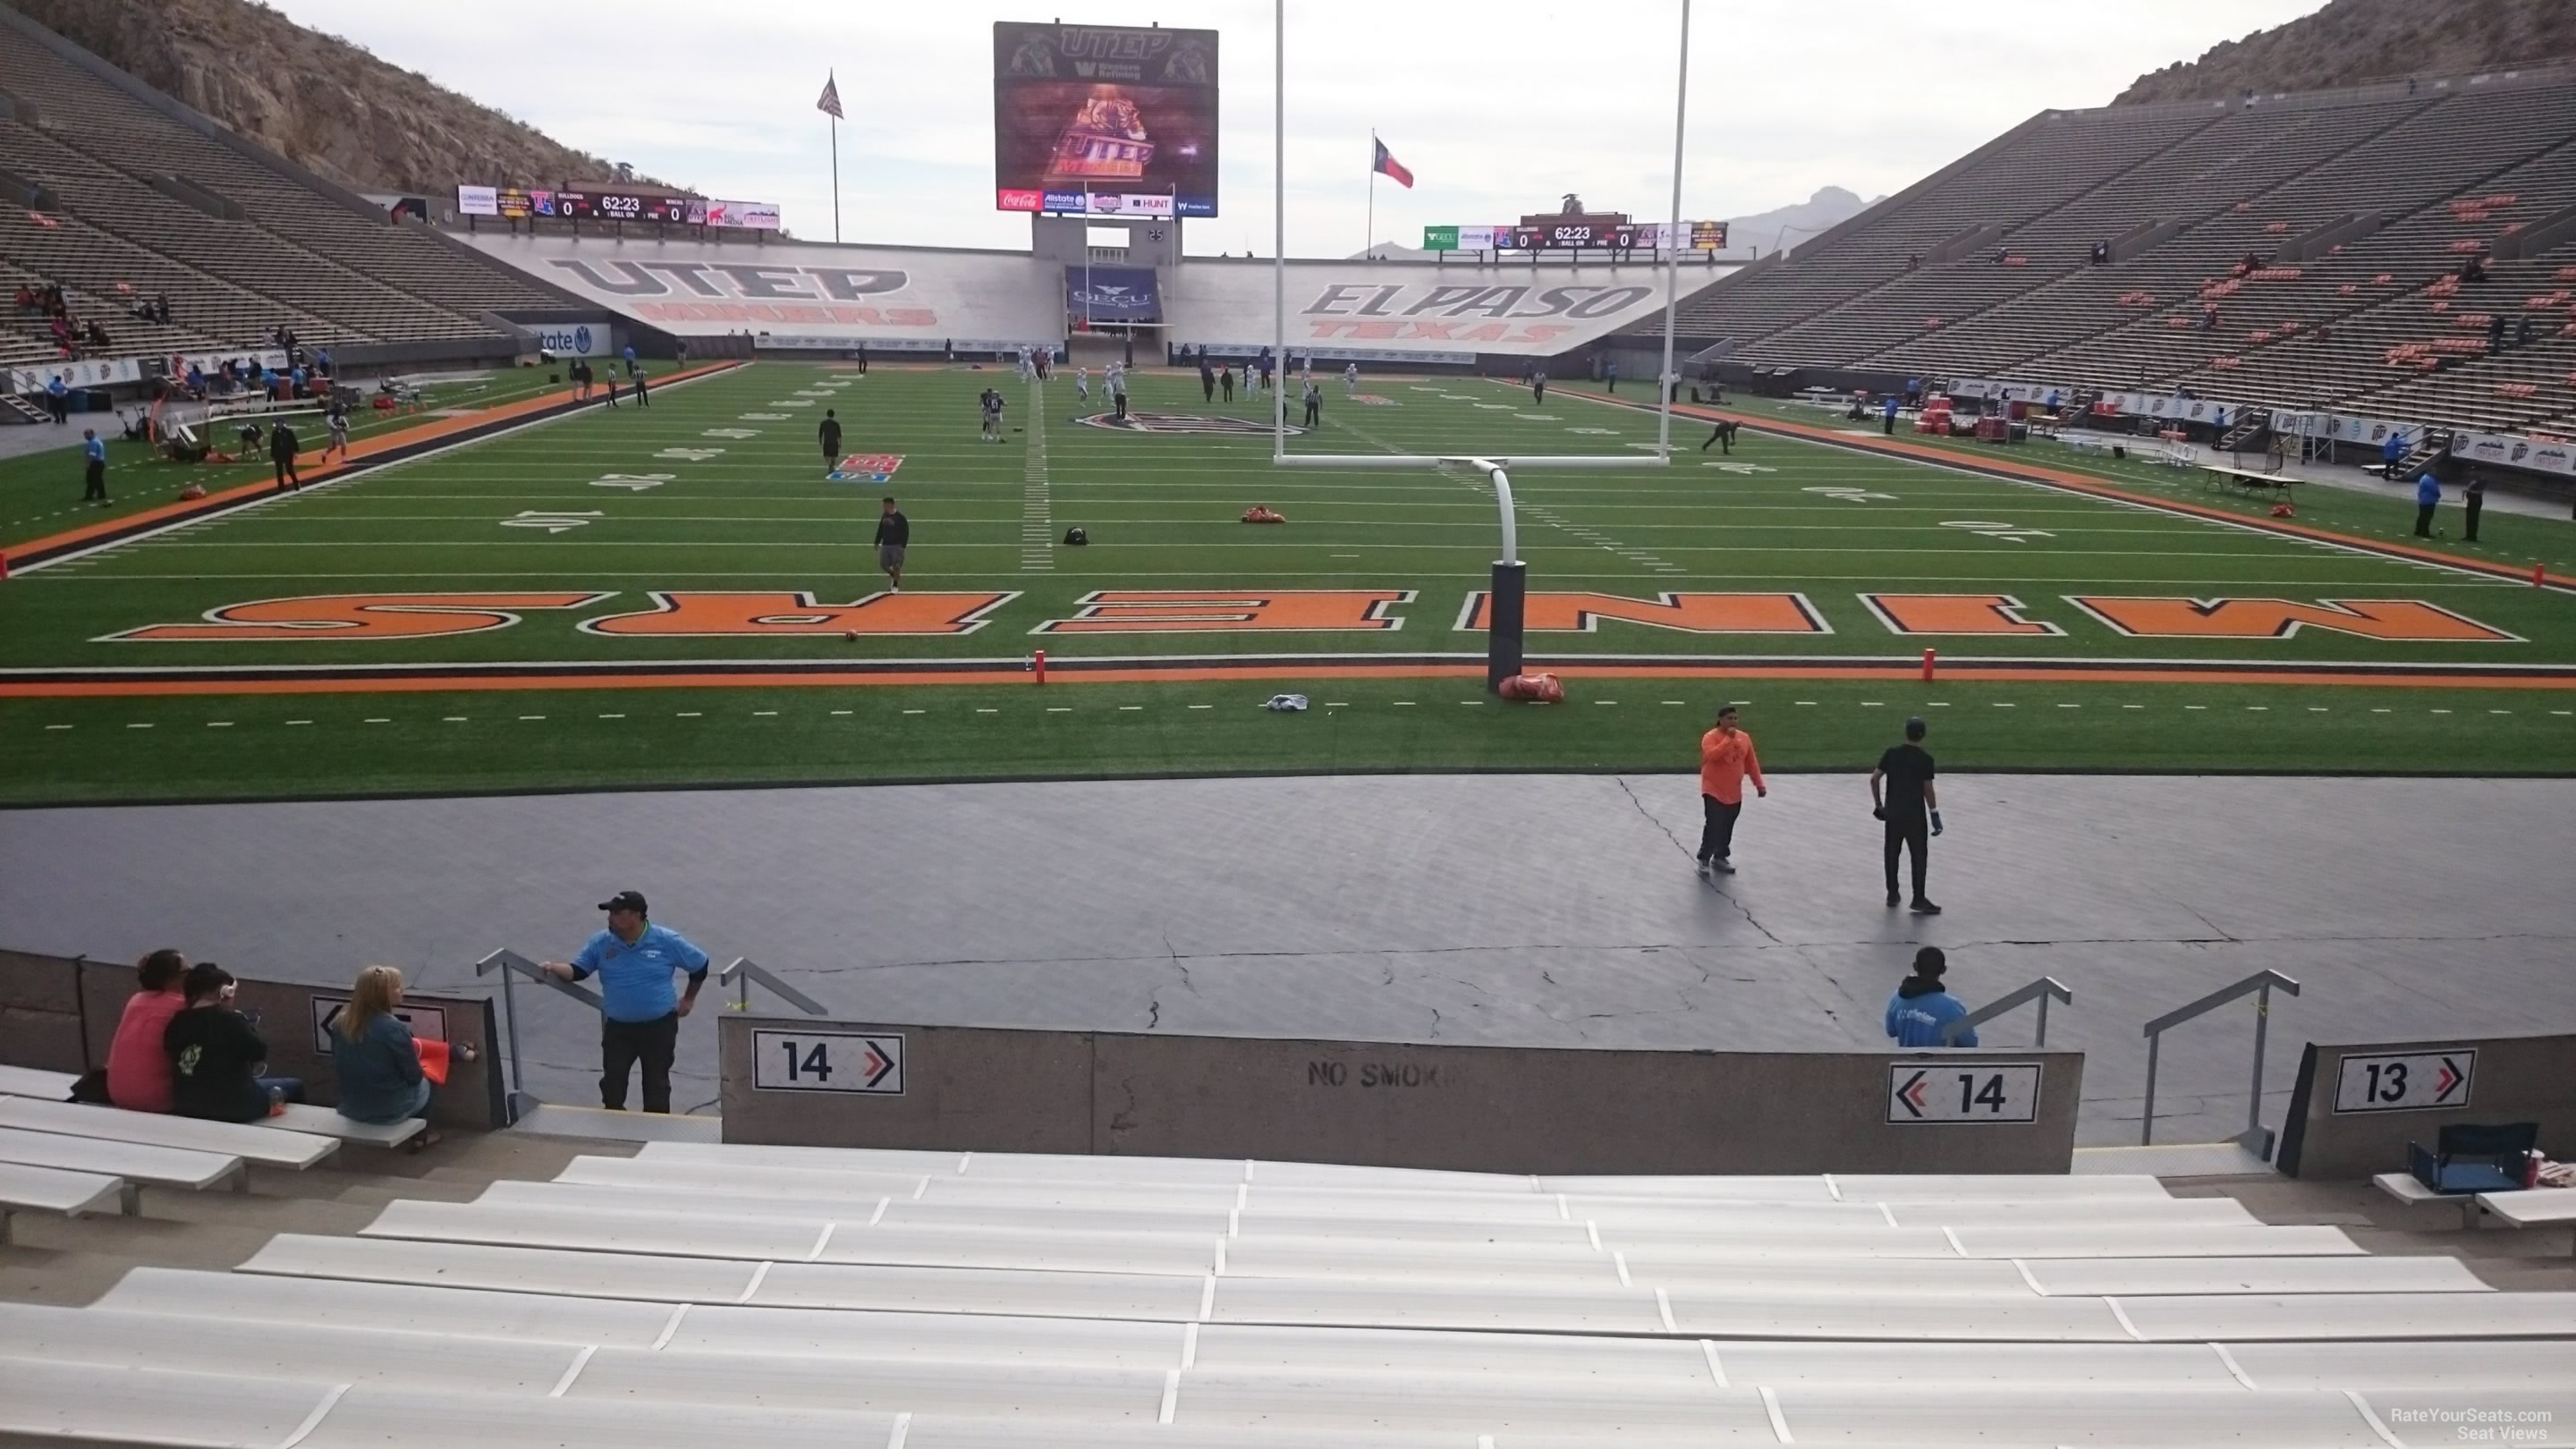 section 14, row 15 seat view  for football - sun bowl